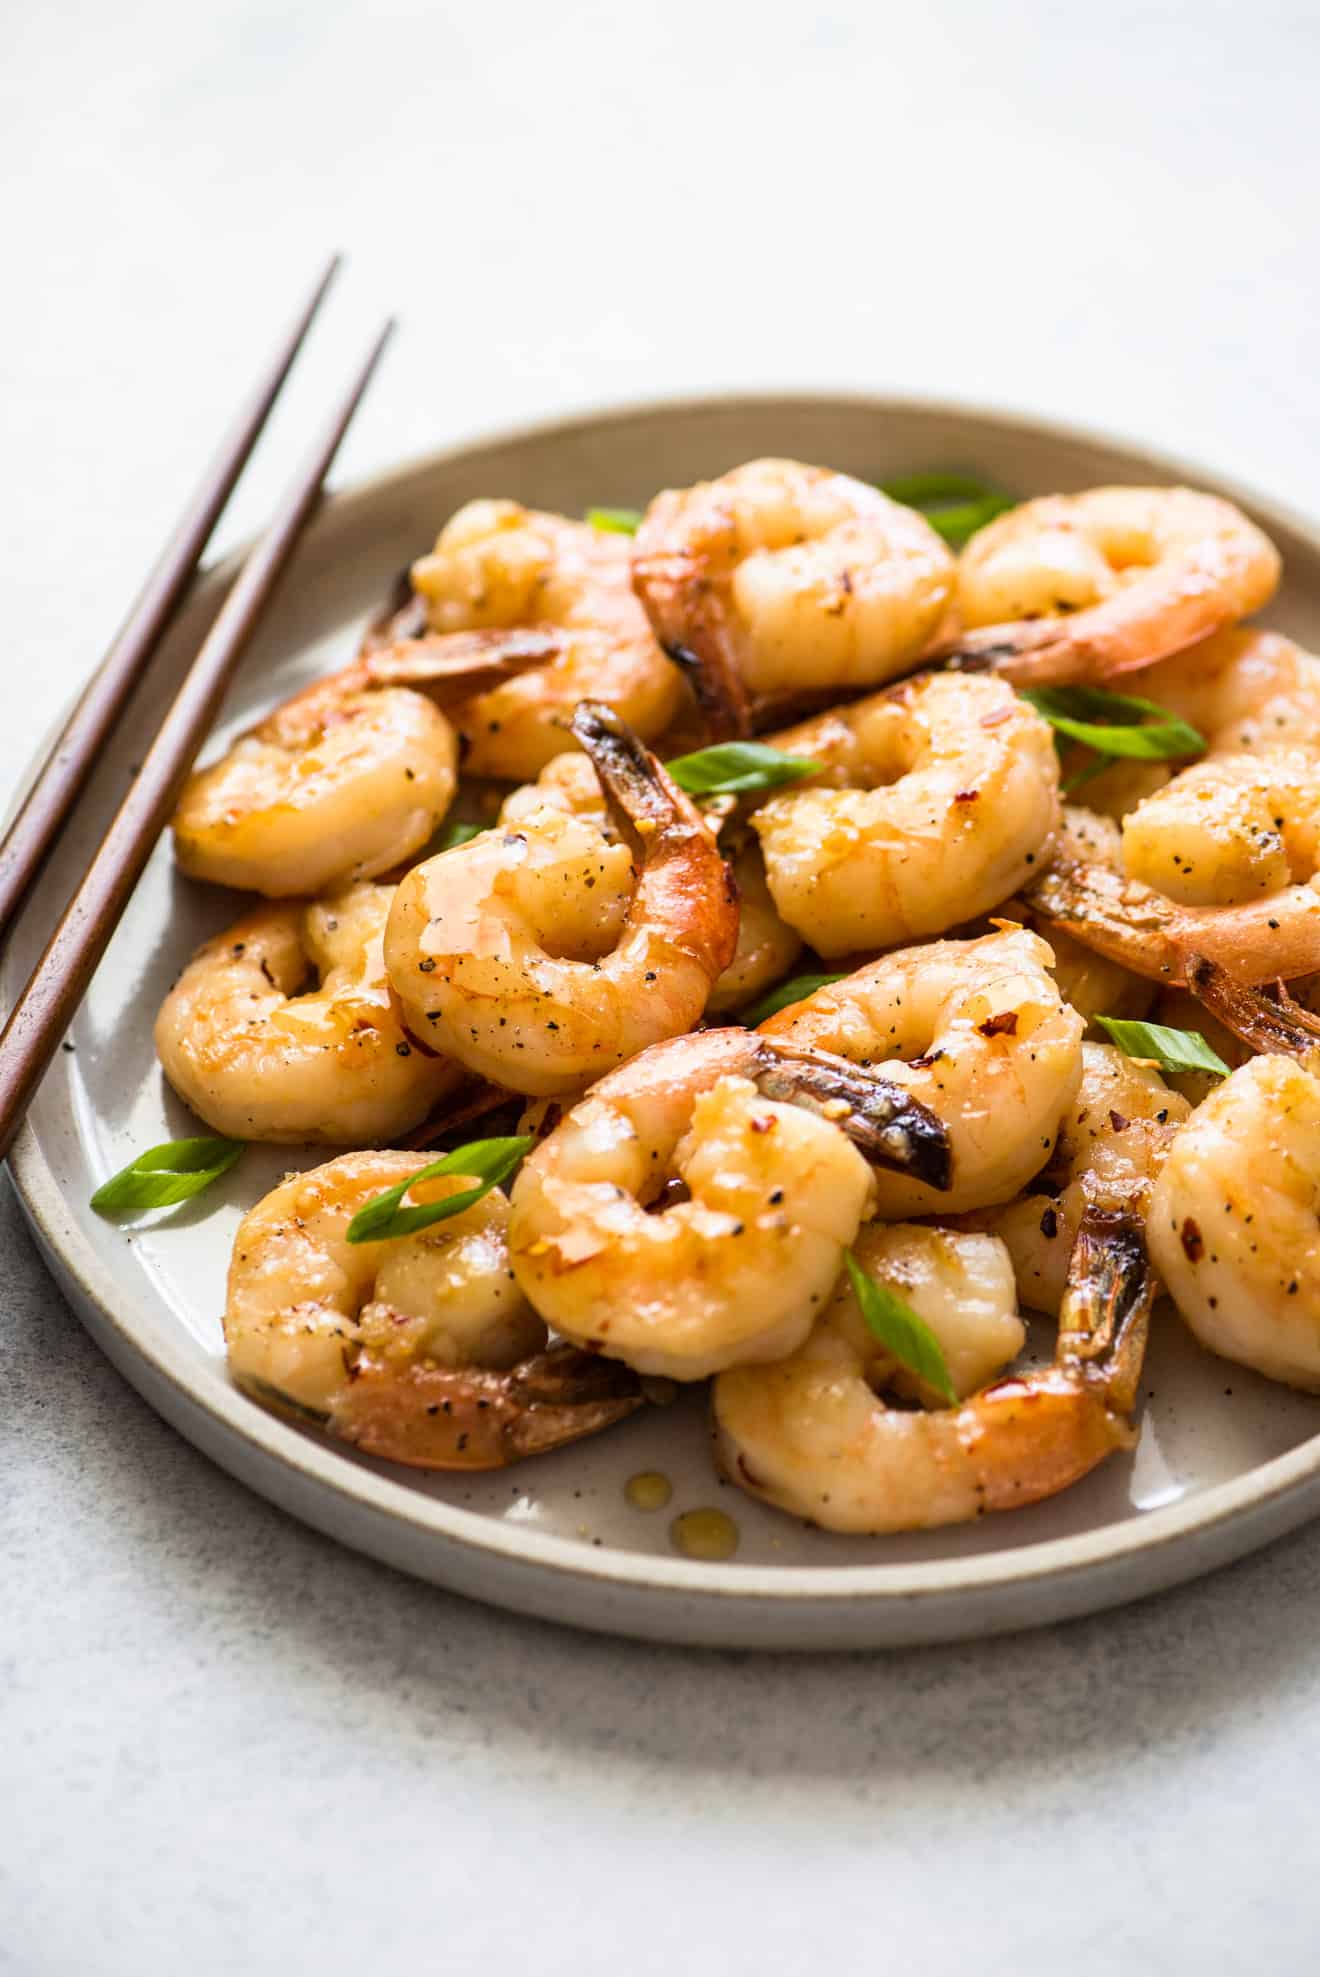 This mouth-watering Honey Chili Garlic Shrimp takes only 15 minutes to make!